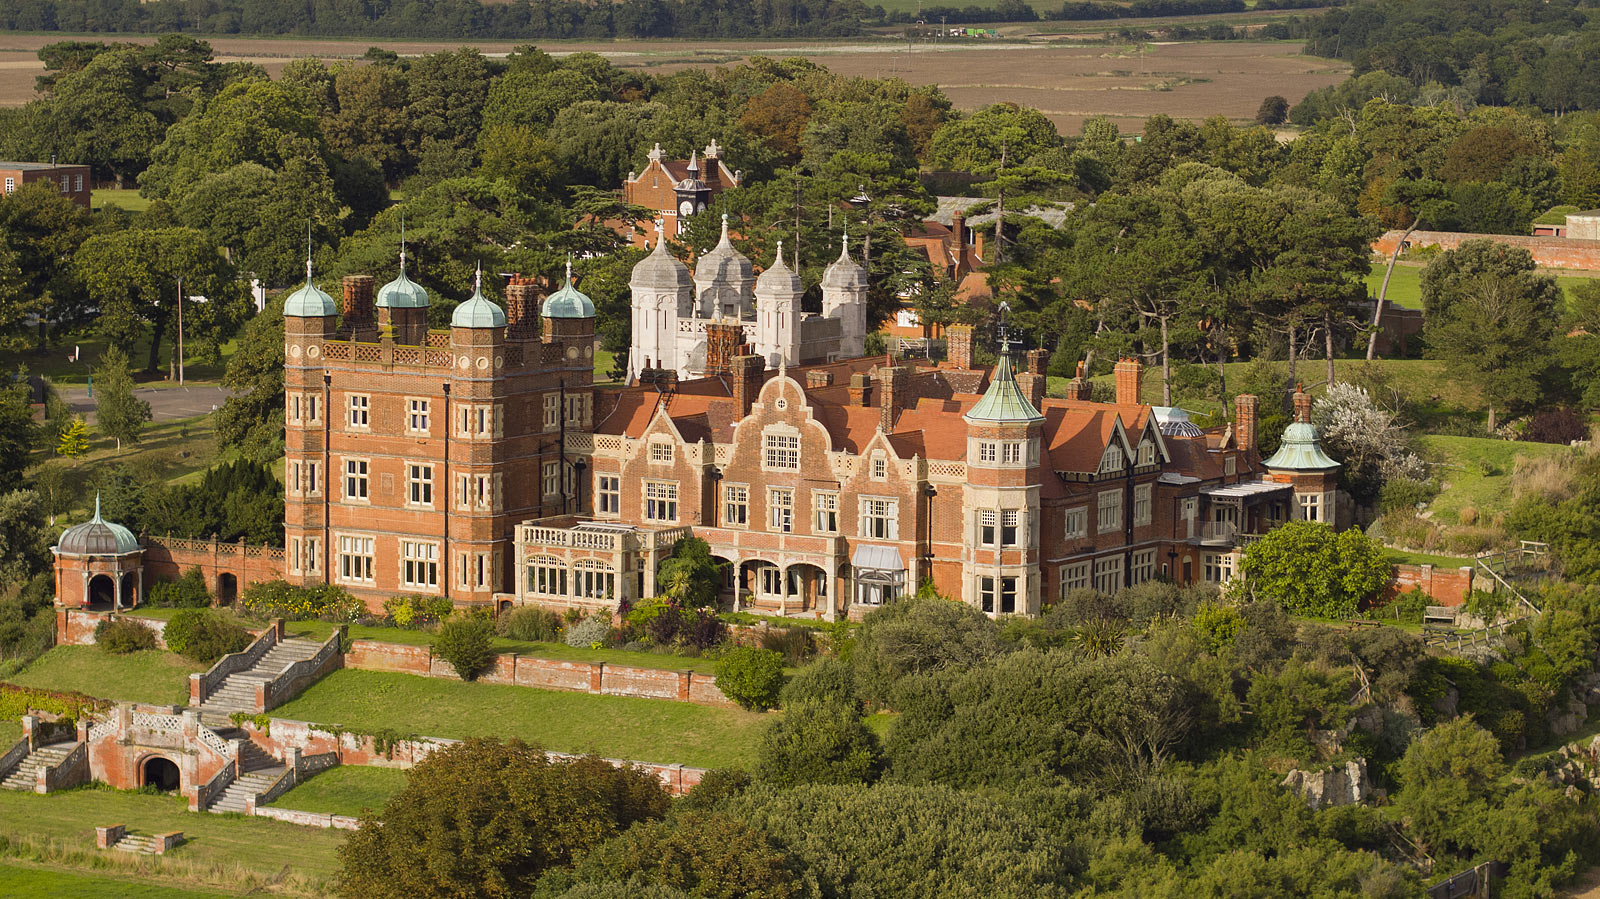 Aerial photograph showing the grounds and aerial view of the Bawdsey Manor in Suffolk